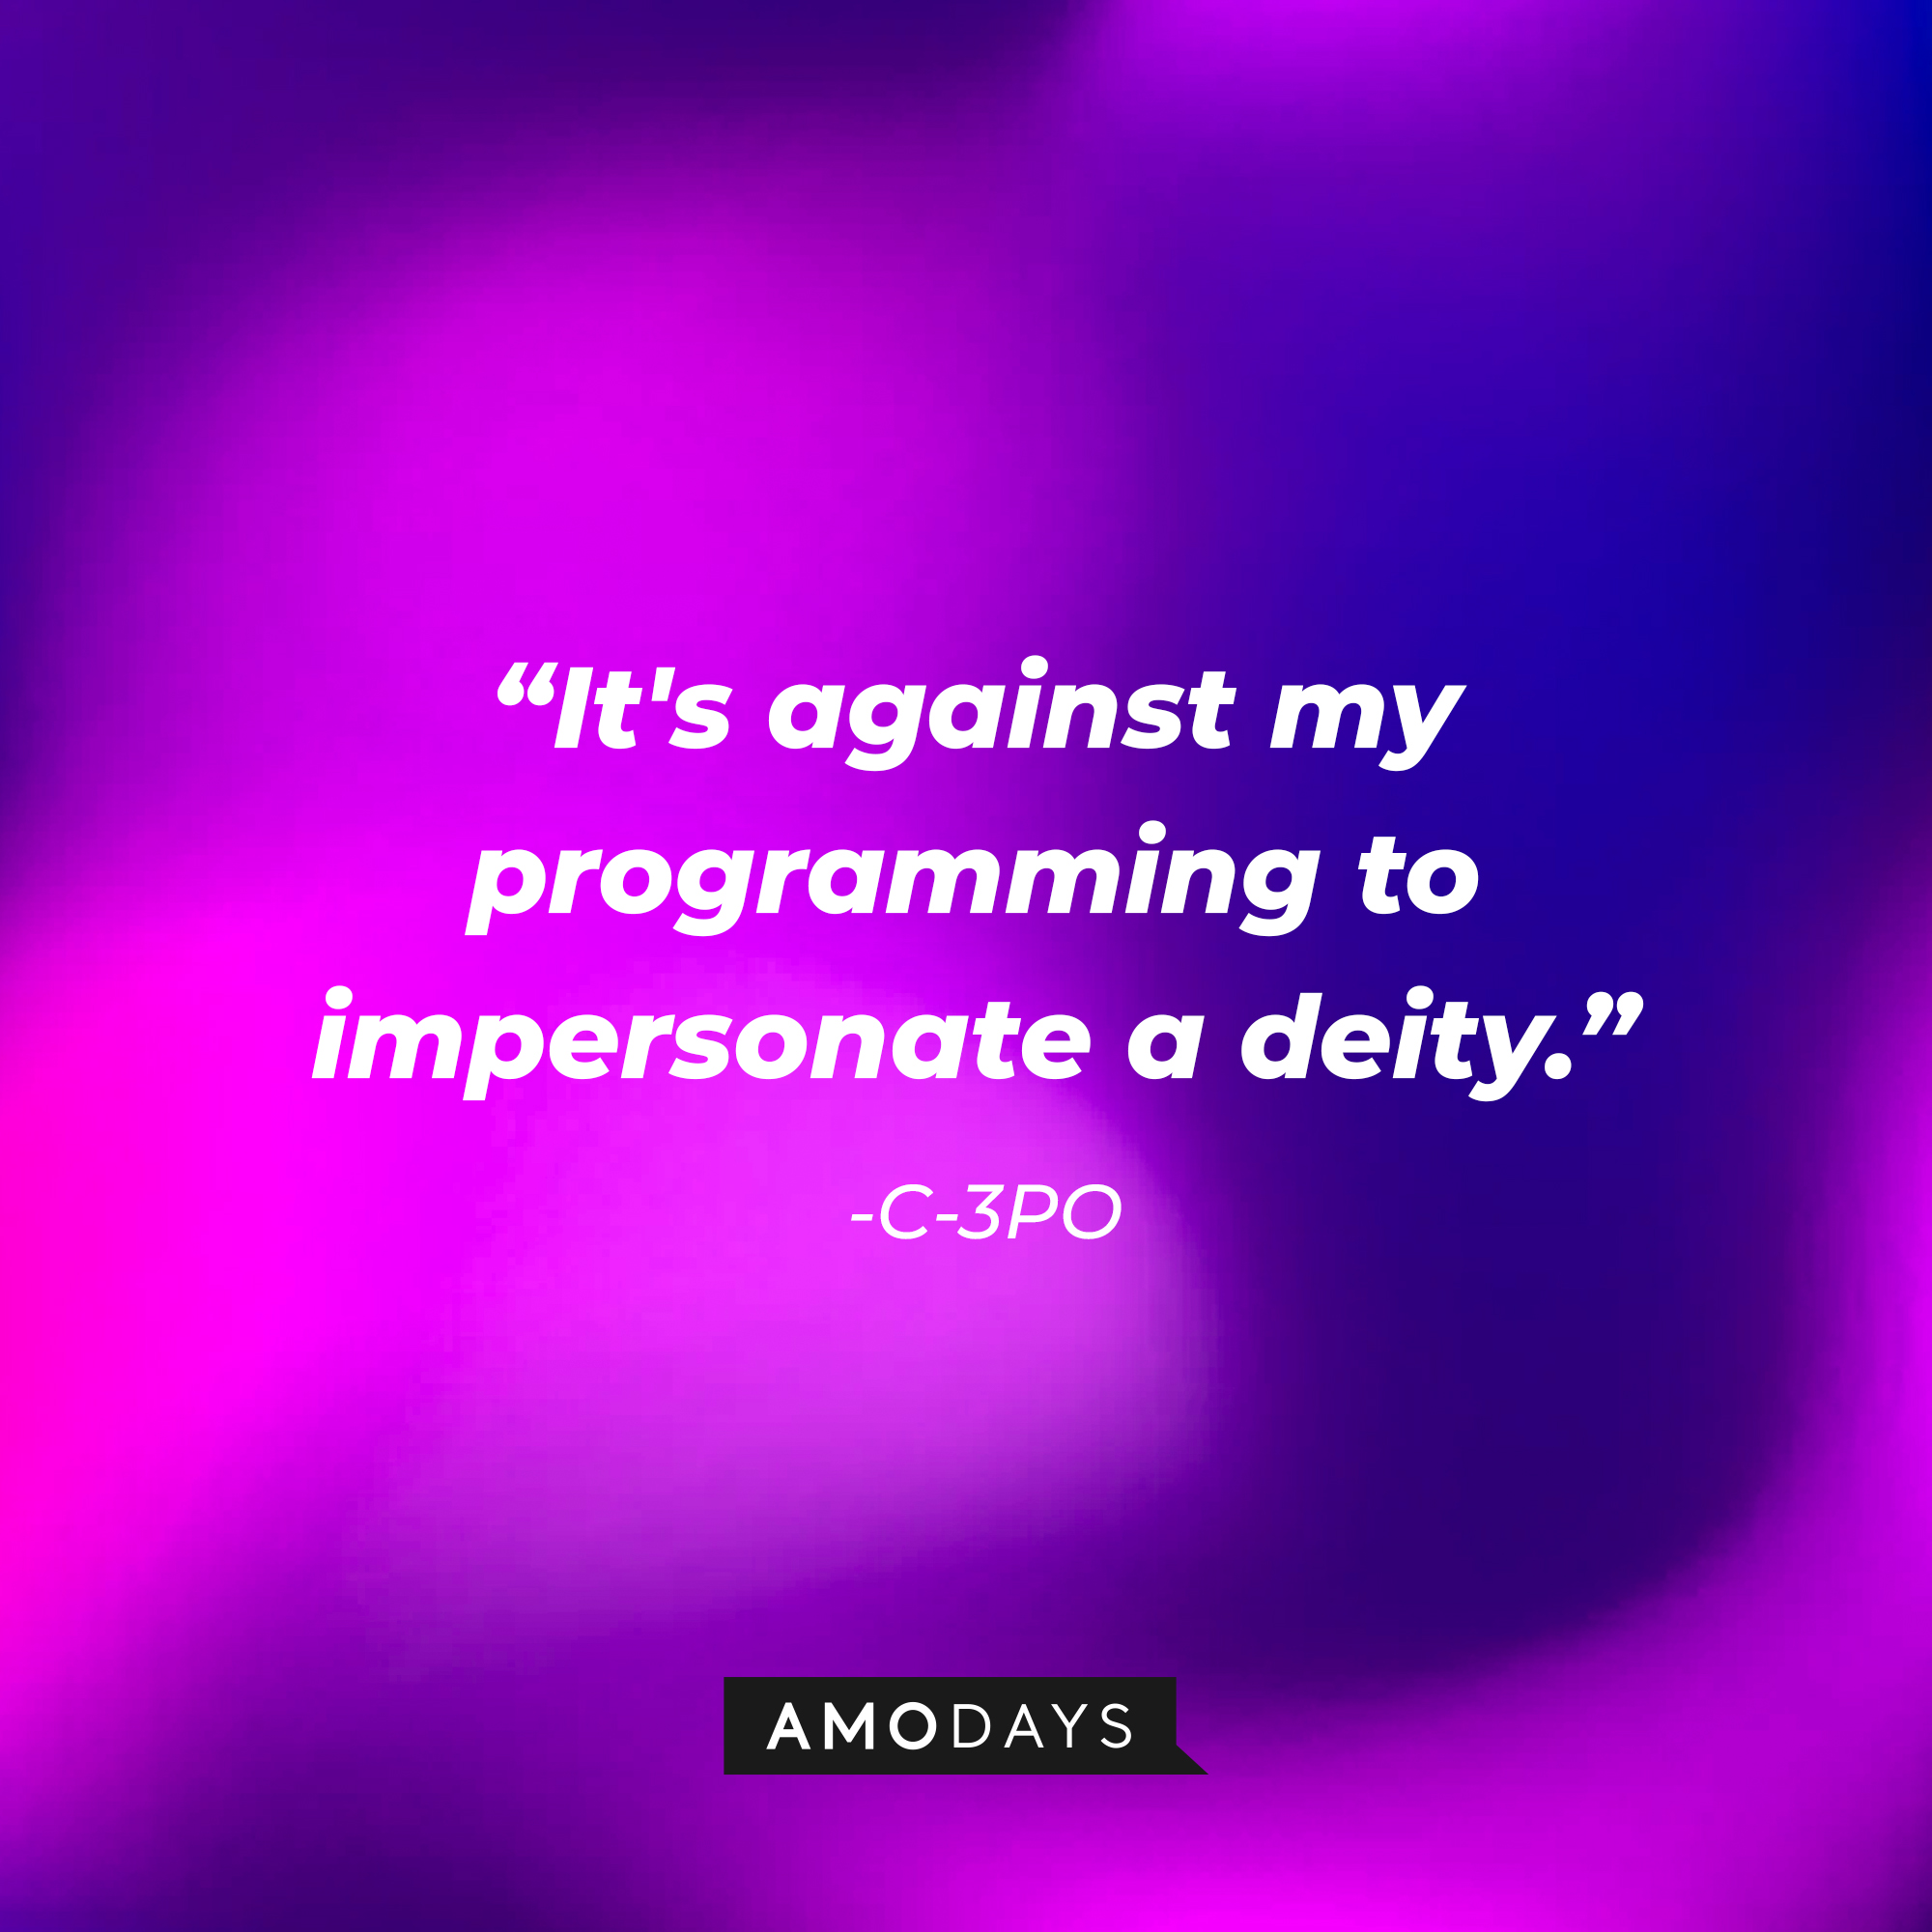 C-3PO’s quote: “It's against my programming to impersonate a deity.”  | Source: AmoDays